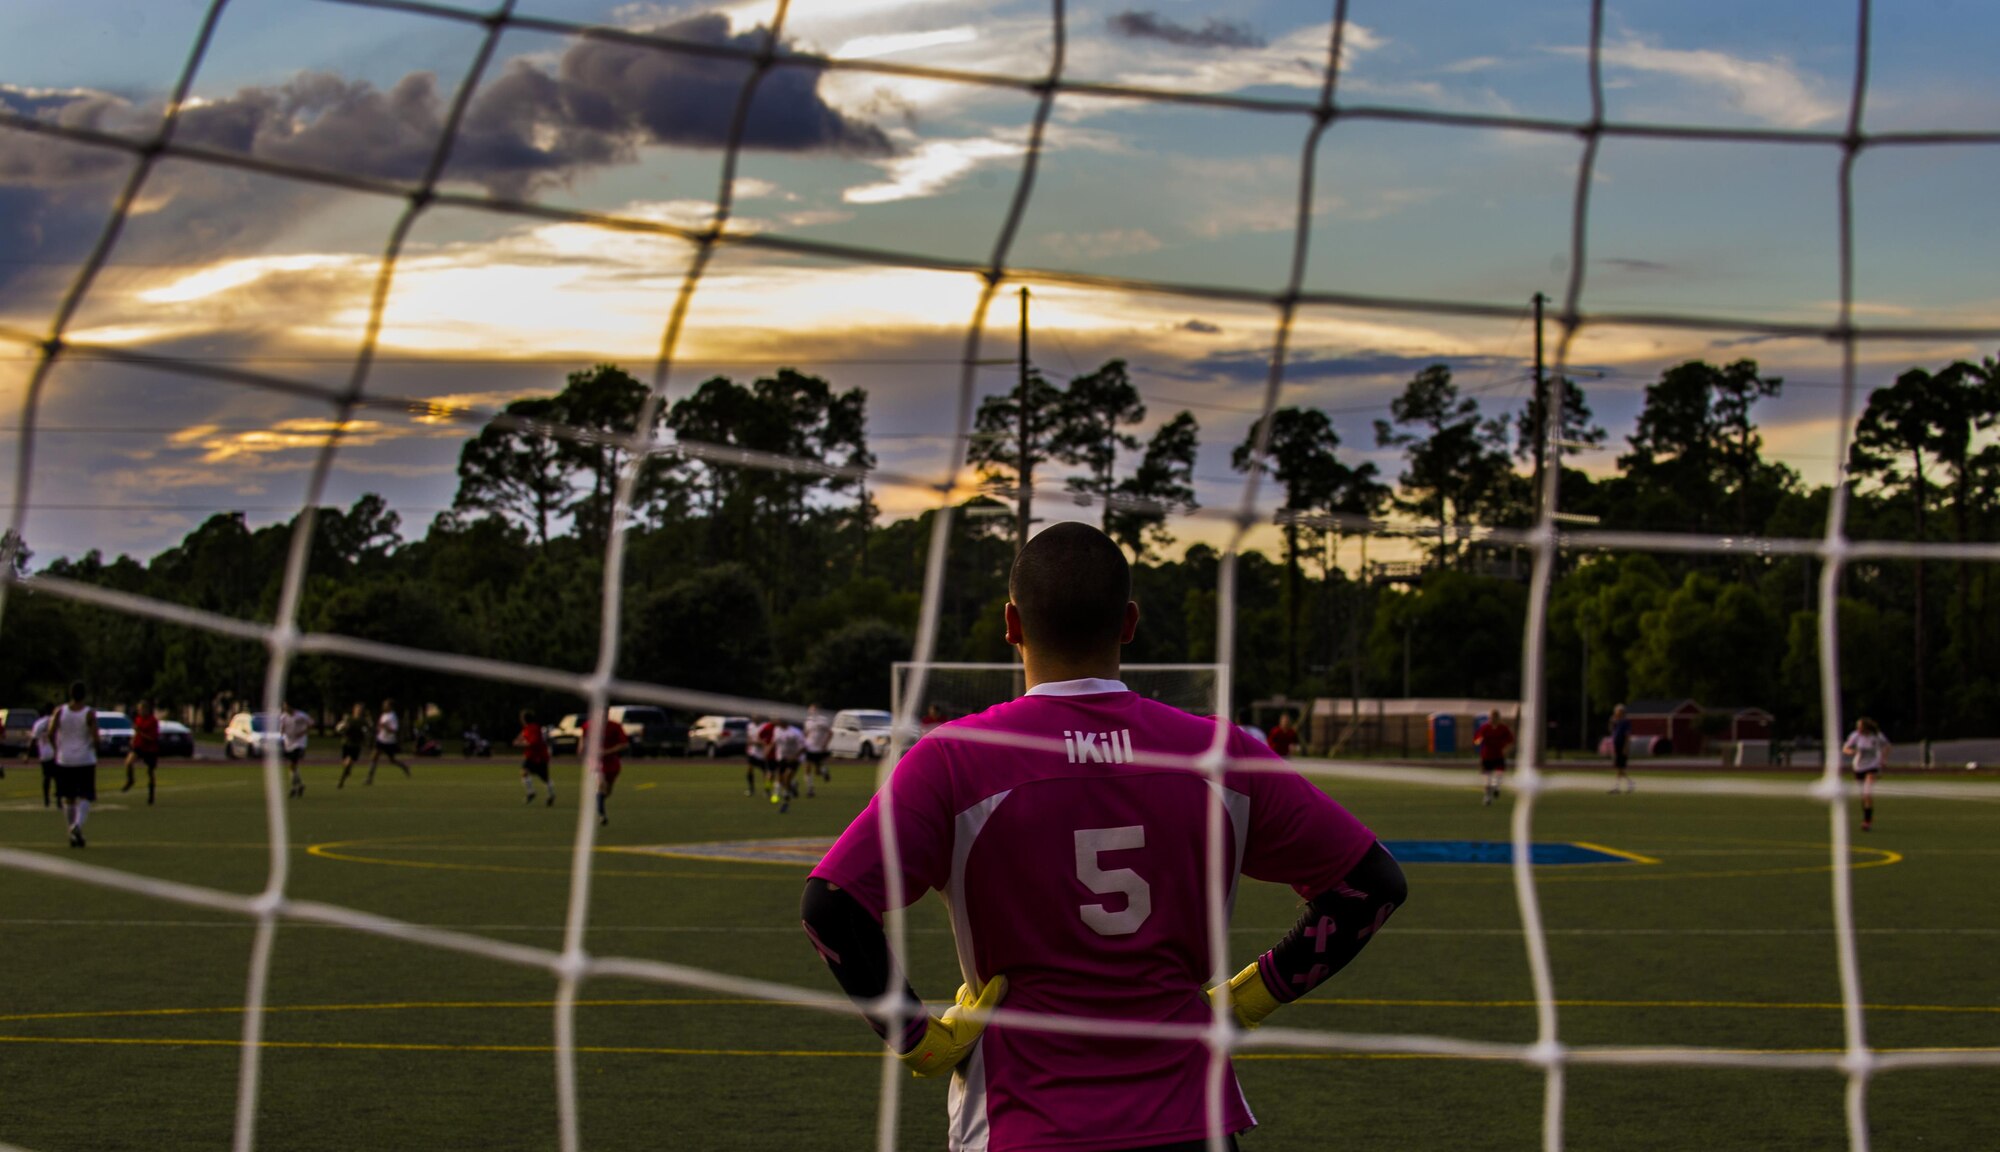 Nathan Wemhoff, a member of the 1st Special Operations Medical Group intramural soccer team, defends the goal against the 319th Special Operations Squadron during the 2016 Intramural Soccer Championship game at Hurlburt Field, Fla. Sept. 13 2016. The 1st SOMDG defeated the 319th SOS in a double-elimination match with a final score of 2-0. (U.S. Air Force photo by Airman 1st Class Isaac O. Guest IV)
